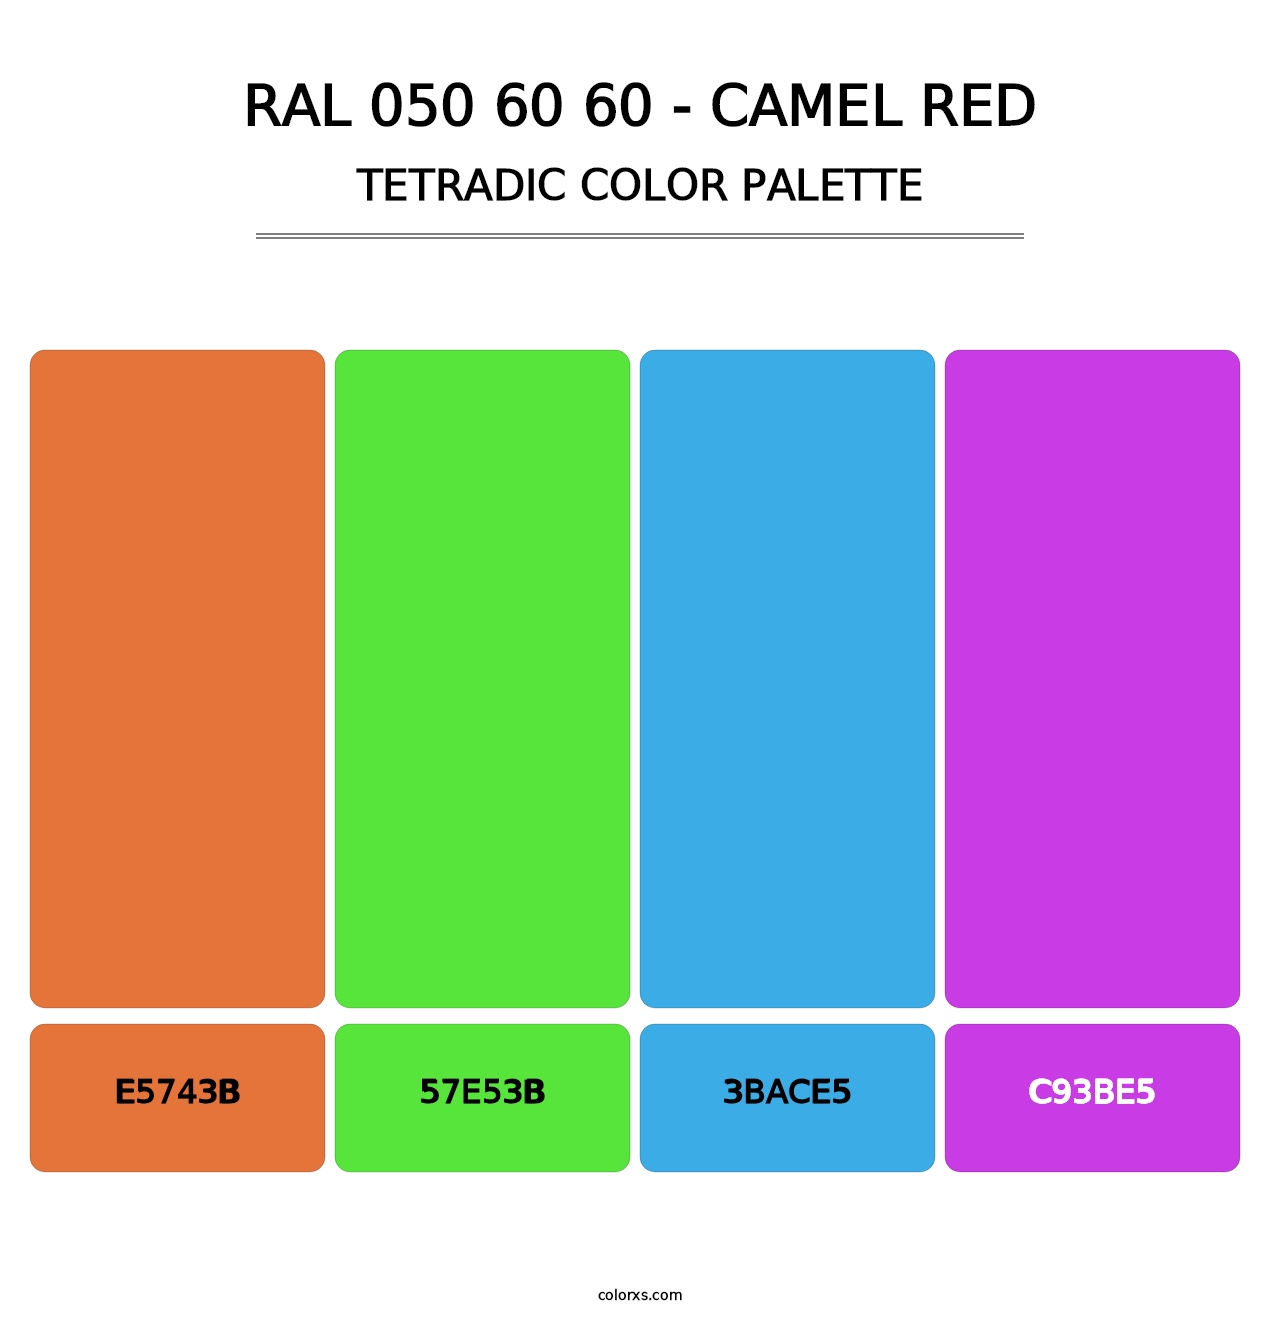 RAL 050 60 60 - Camel Red - Tetradic Color Palette